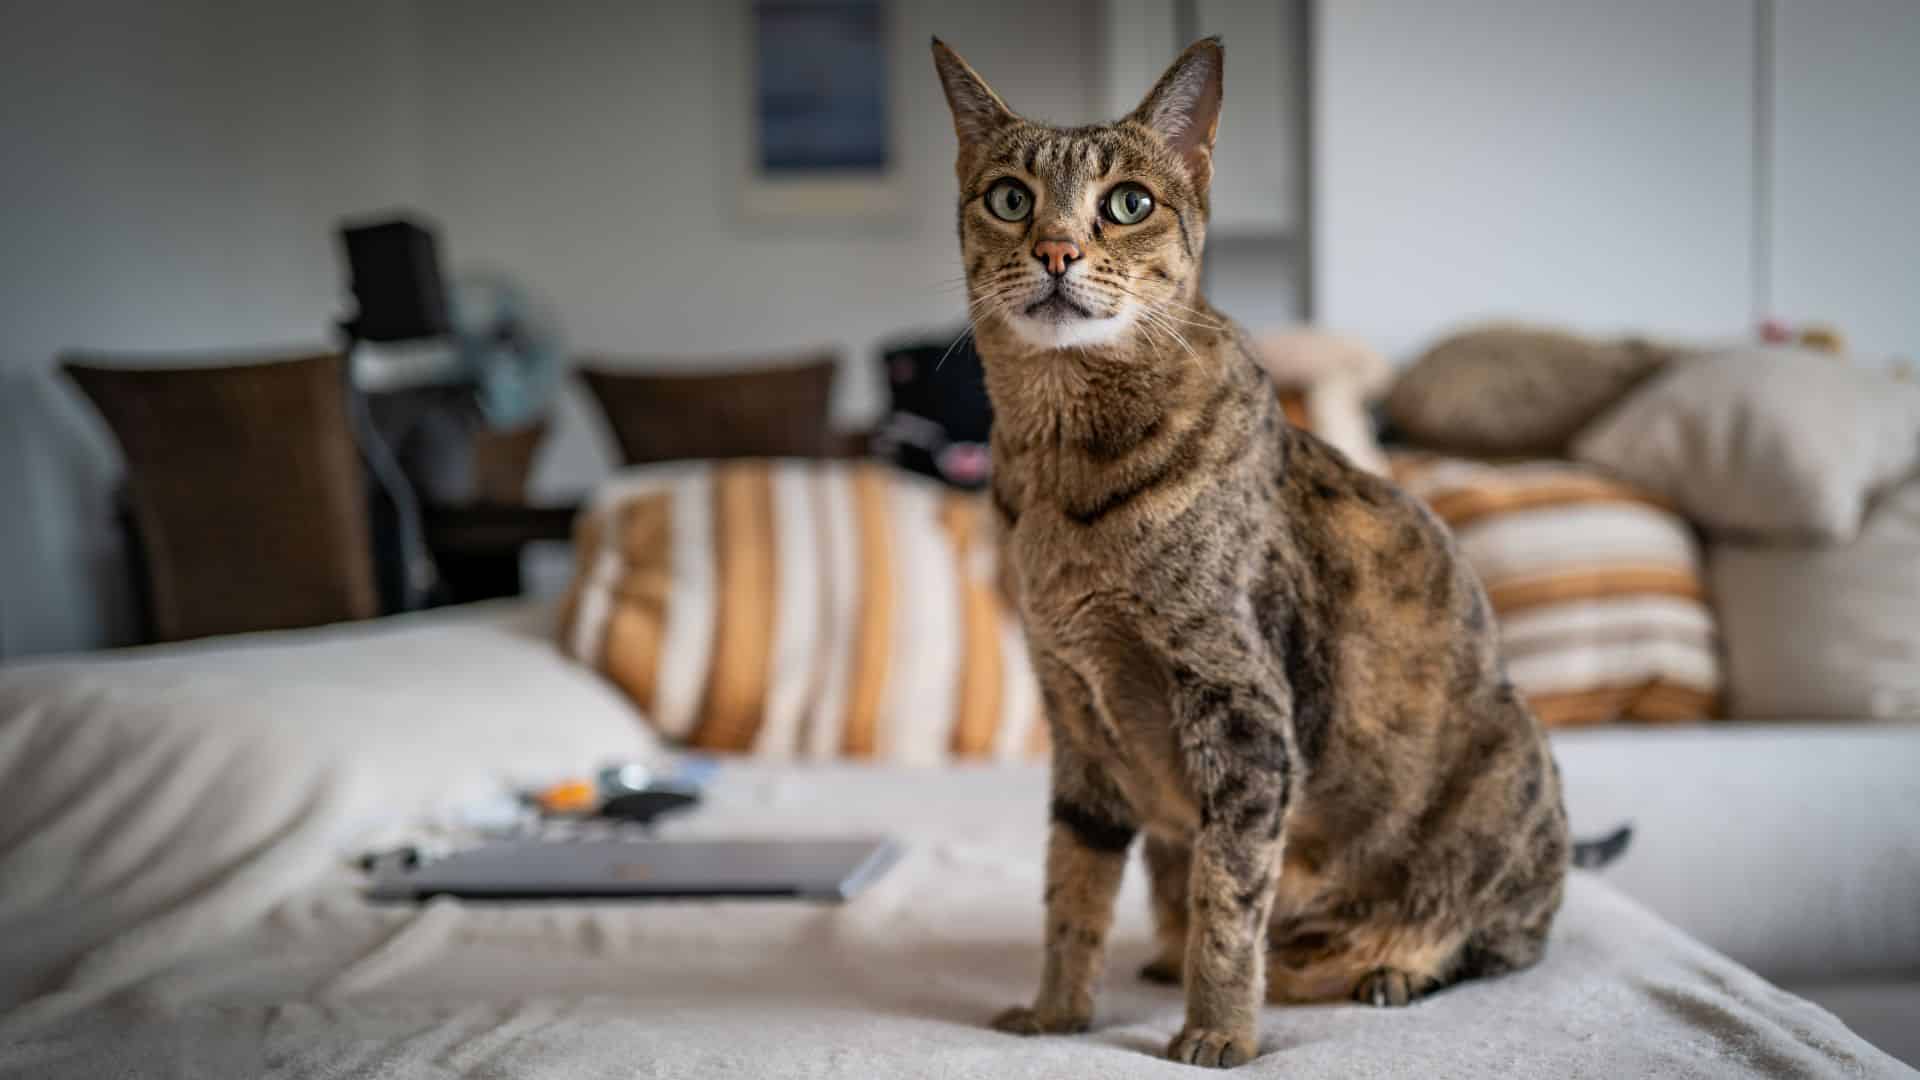 Savannah Cat is sitting on the couch and looking at the camera